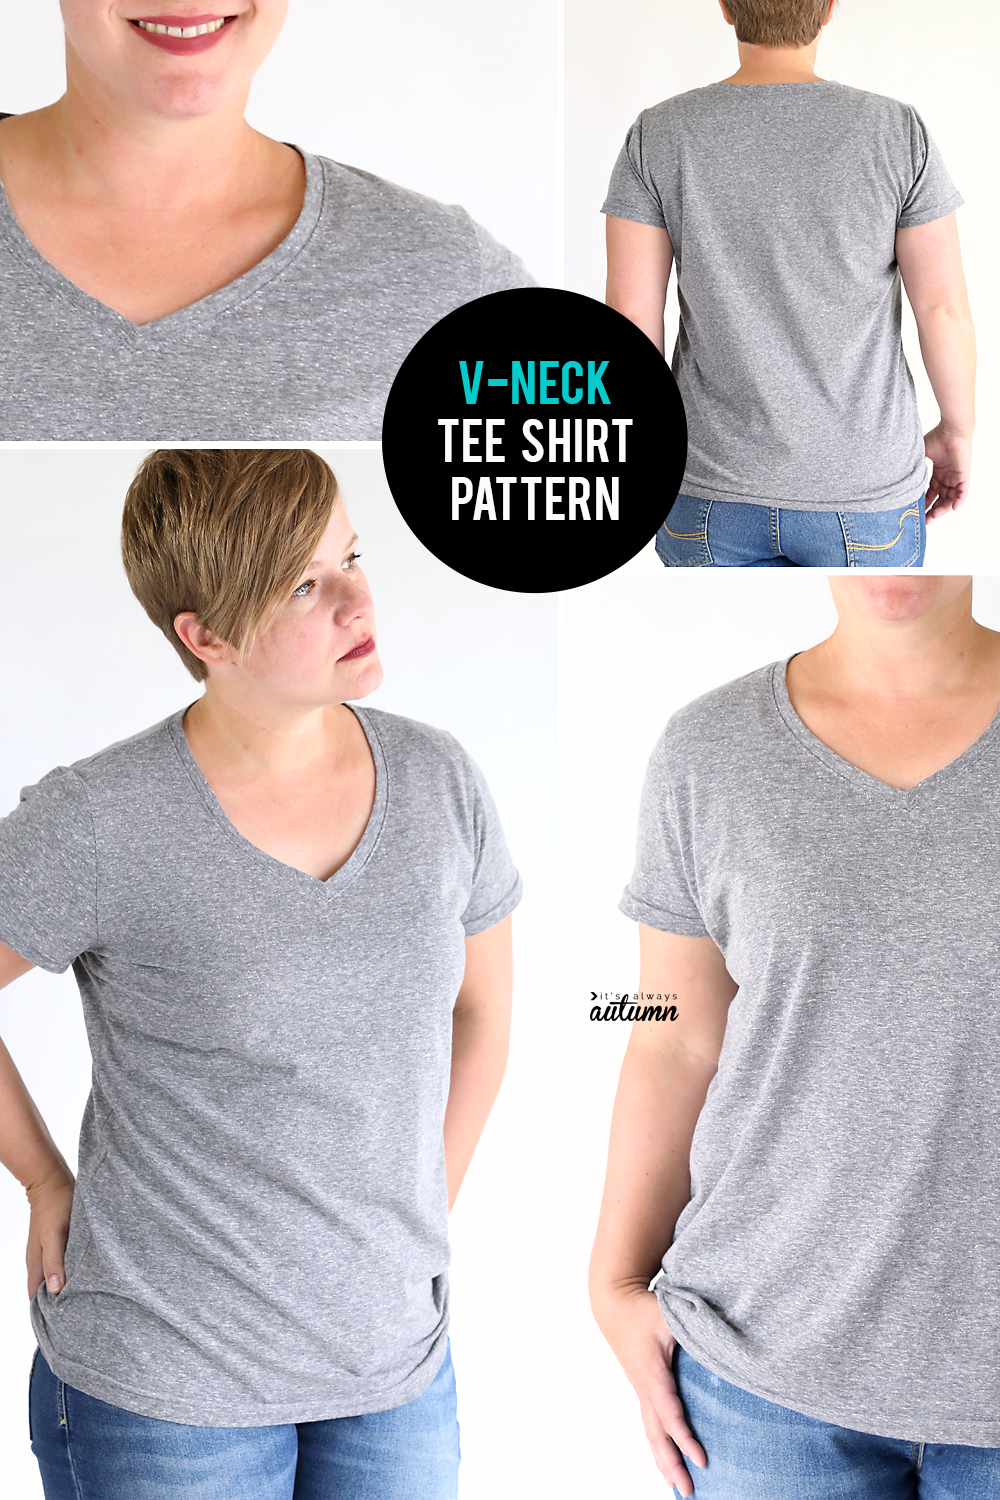 How to make a v-neck t-shirt! Free sewing pattern in women's size L.